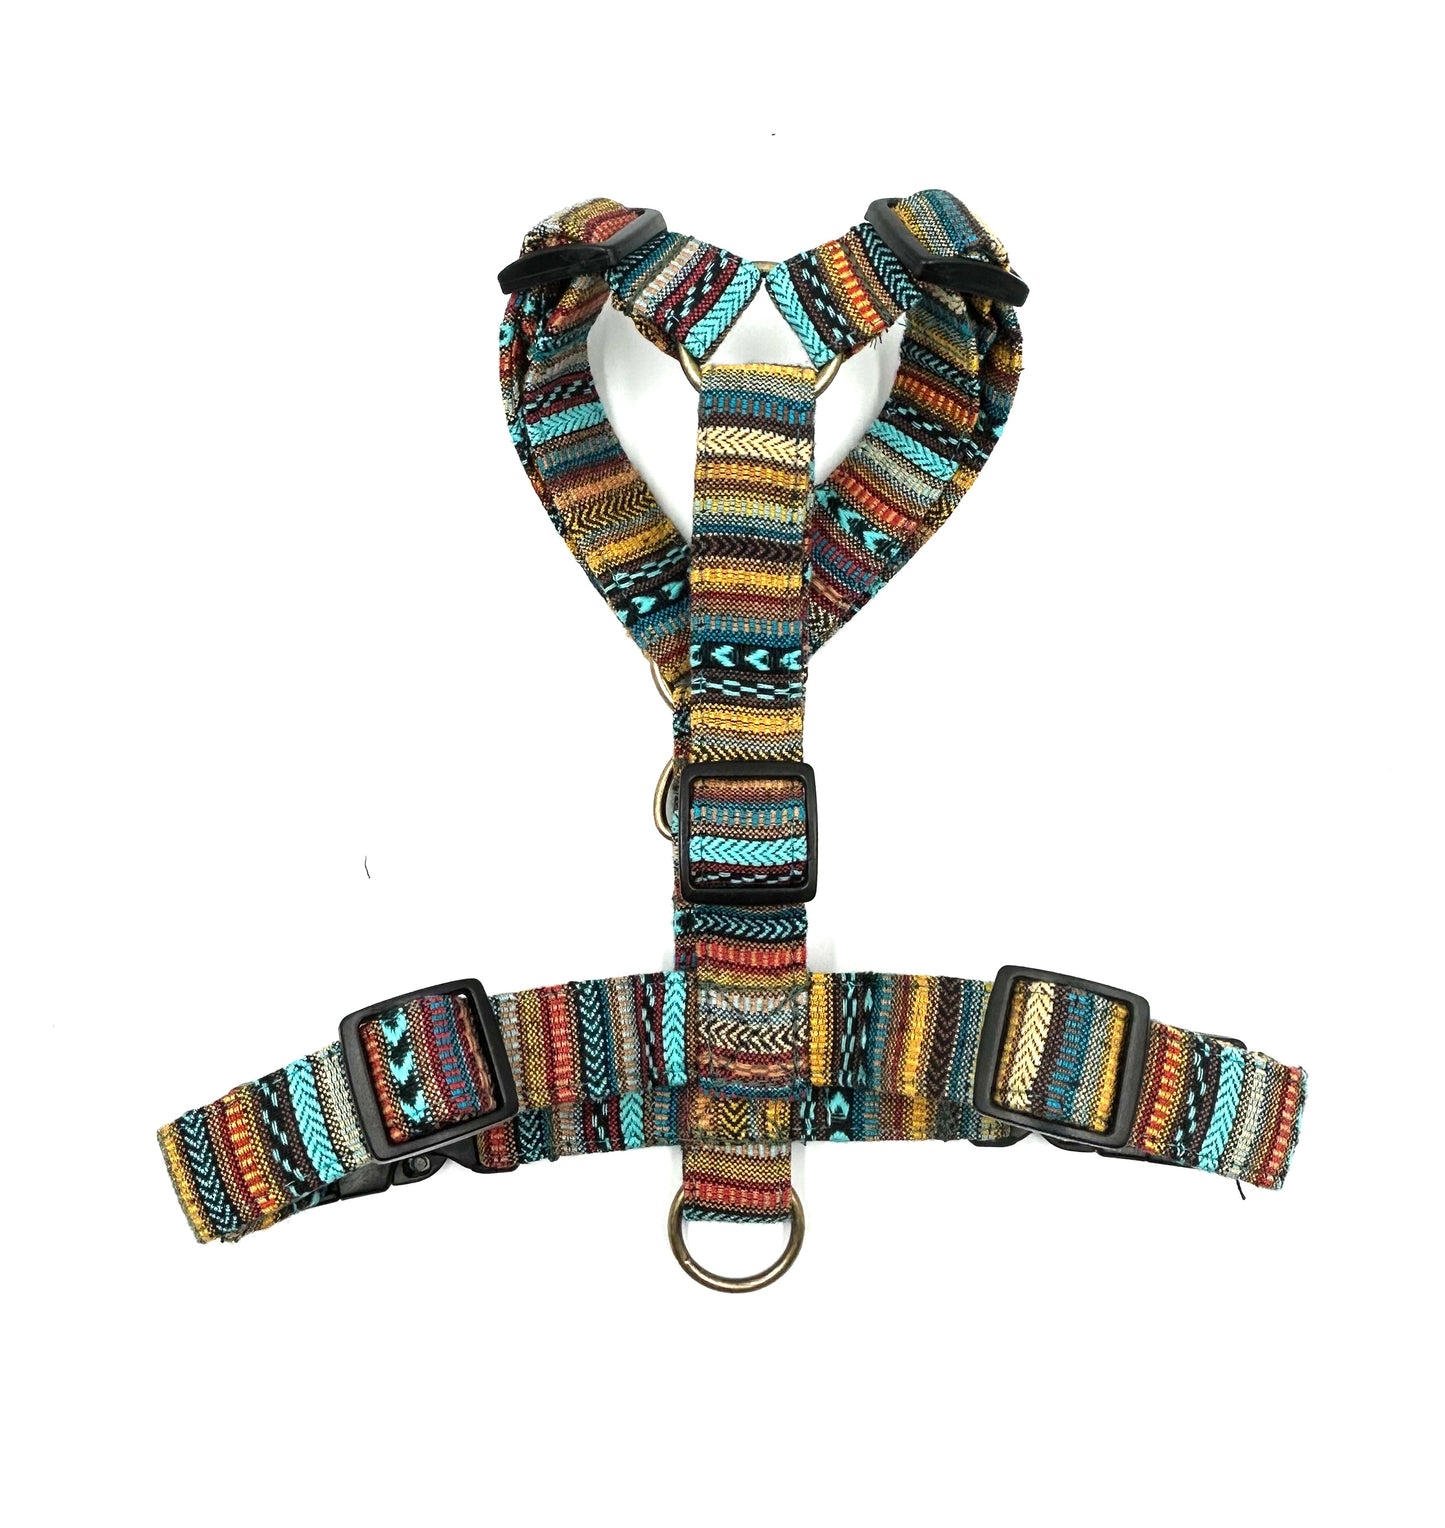 Dreamcoat Strap Harness